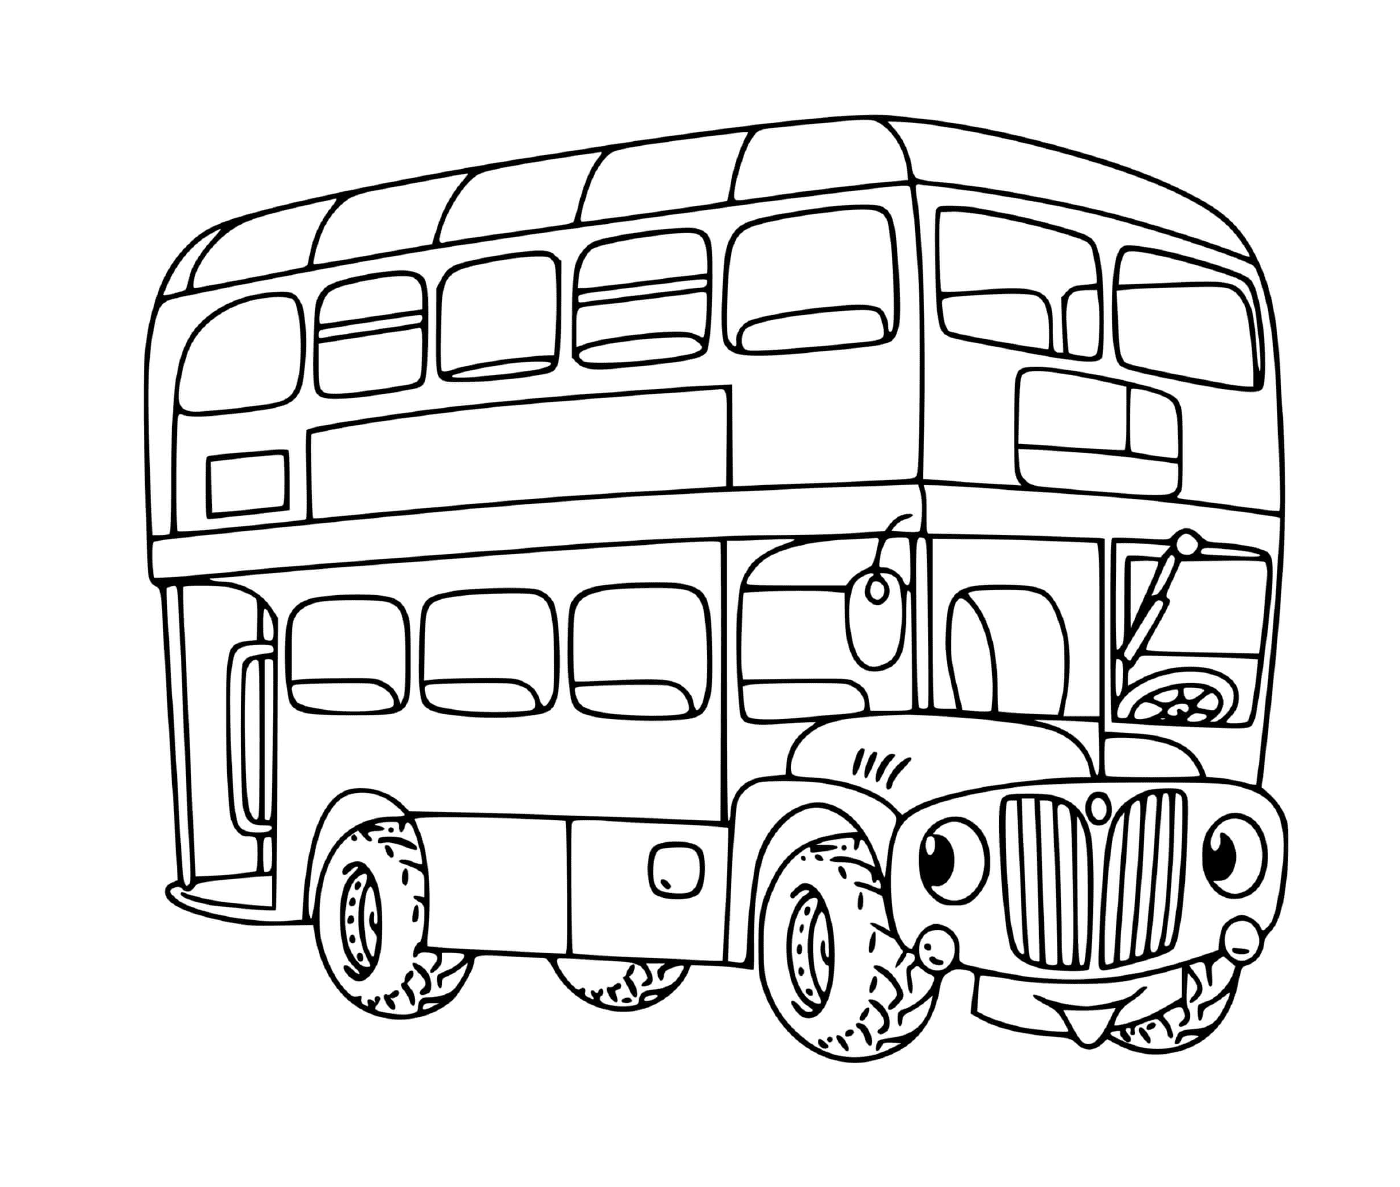  A two-level bus for children 